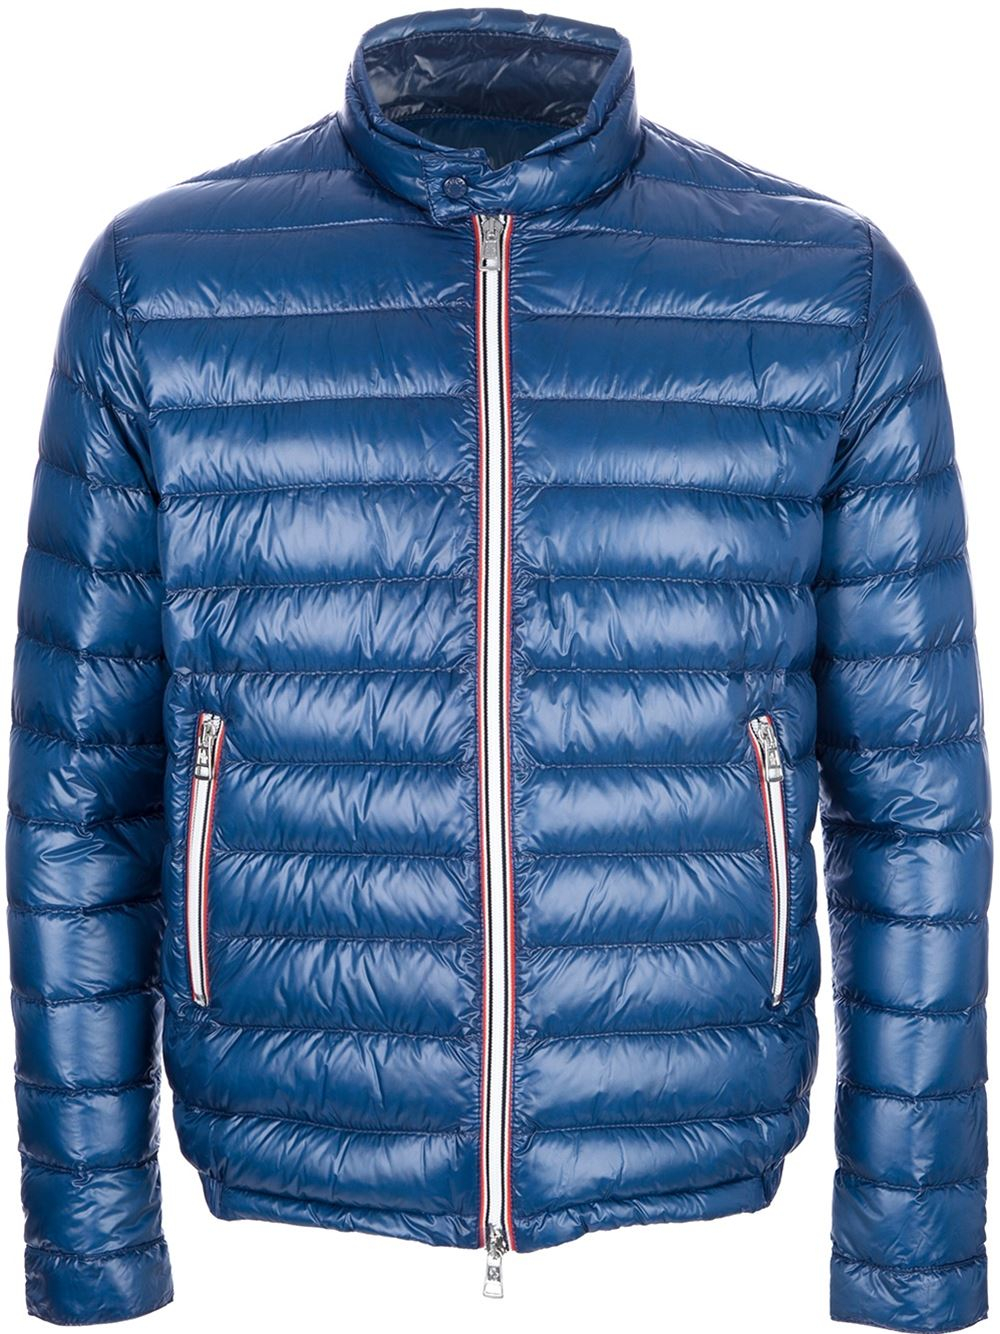 Lyst - Moncler Rigel Feather Down Jacket in Blue for Men